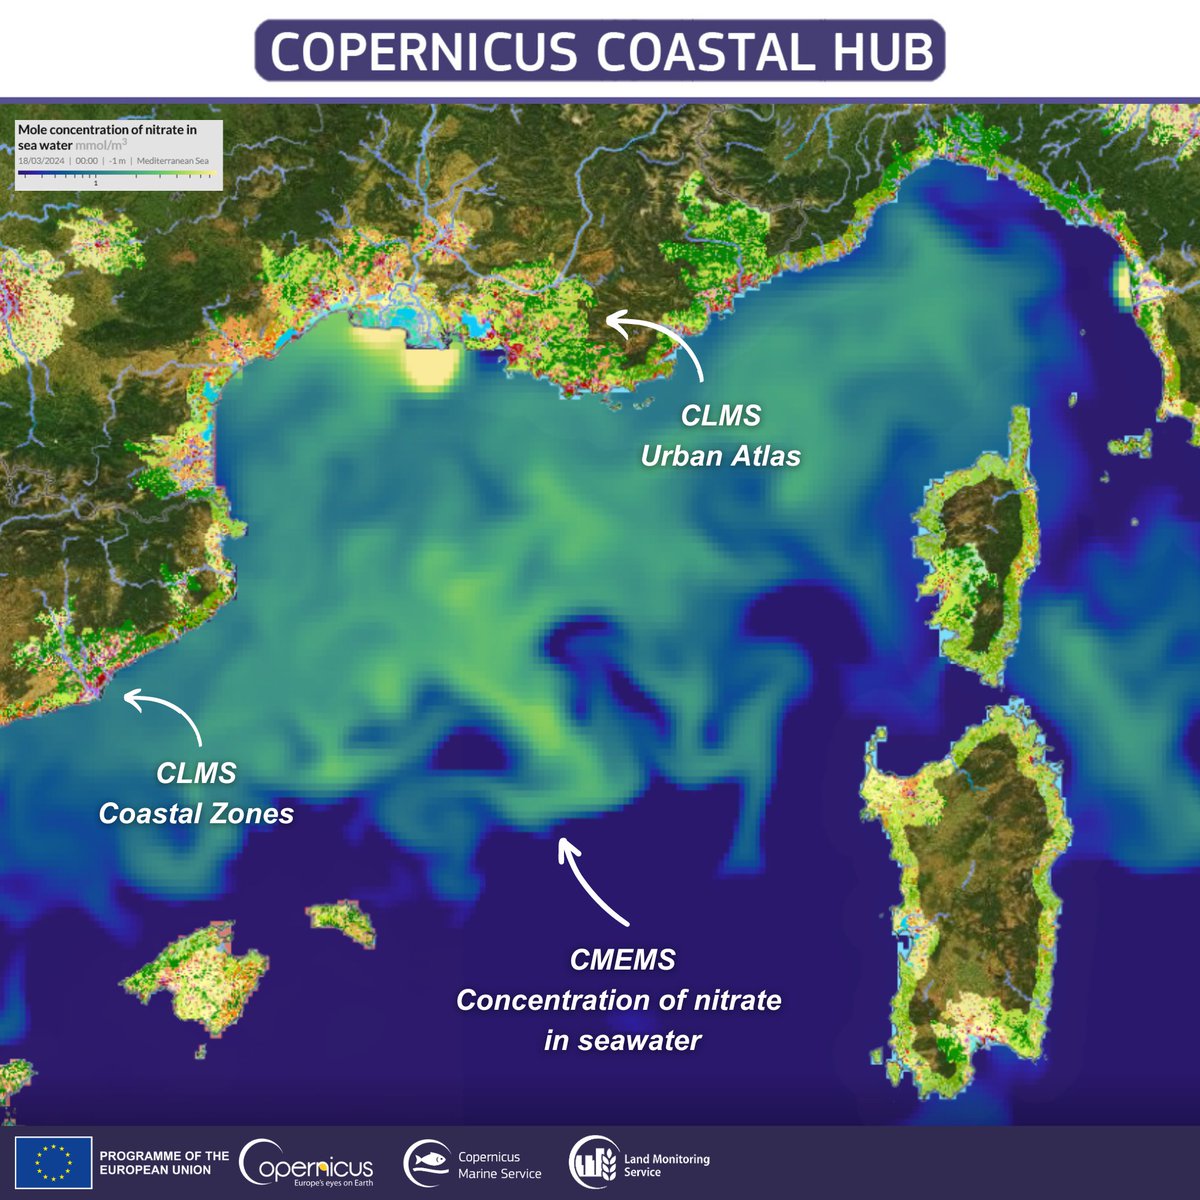 The #Copernicus #CoastalHub is a one-stop shop for data related to coastal areas🏖️ The Hub's viewer allows you to explore datasets such as nitrate concentration in the #Mediterranean Sea, which is key for managing the health of marine ecosystems 🌊 coastal.hub.copernicus.eu